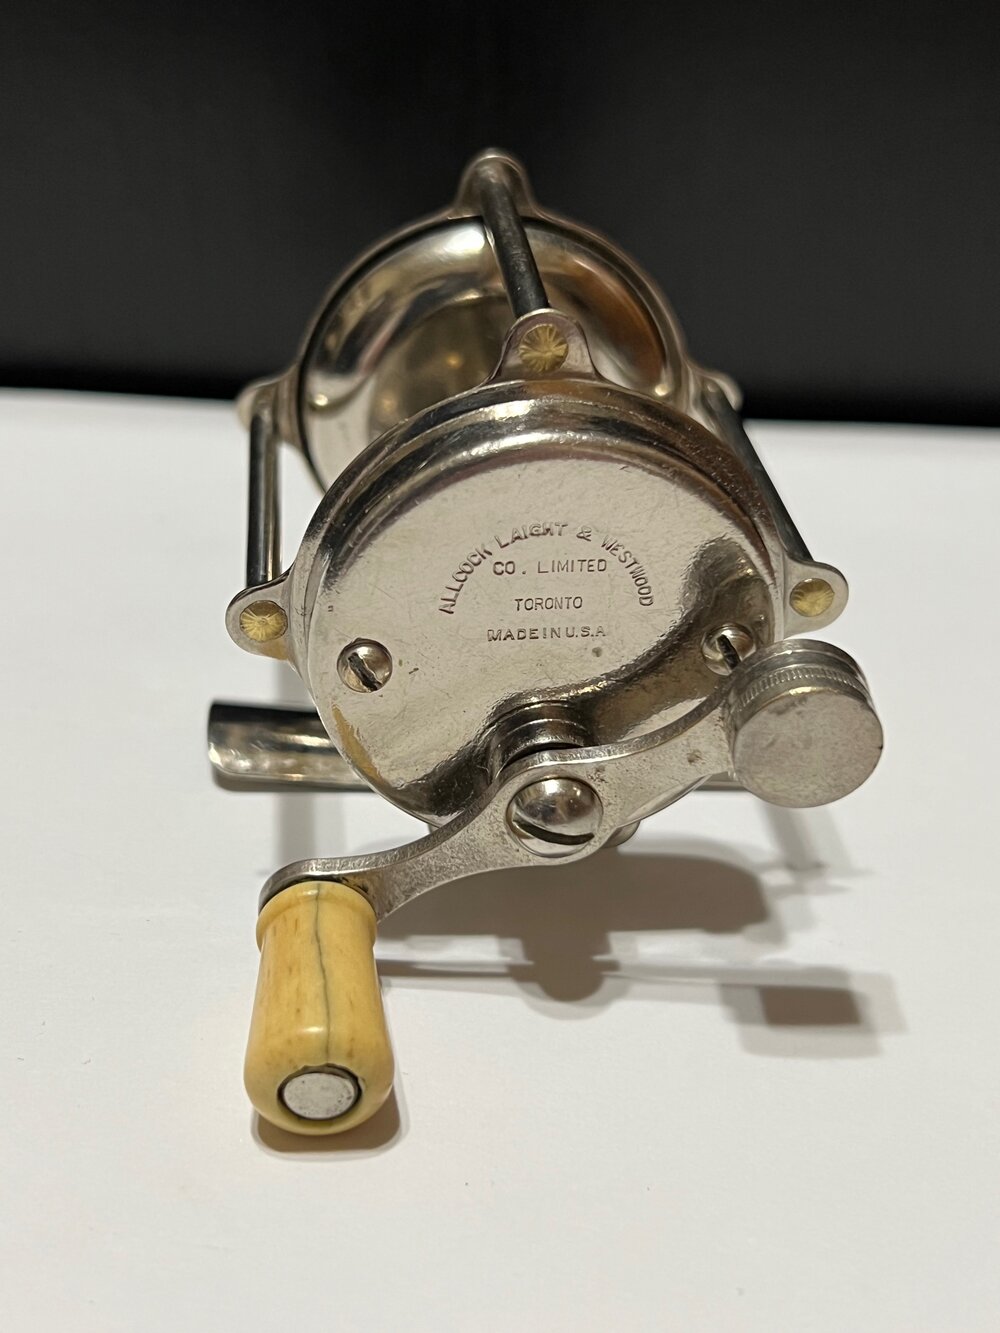 Union Hardware Company ALLCOCK LAIGHT & WESTWOOD CO. Toronto Canada TRADE  REEL with Box Circa-1923 — VINTAGE FISHING REELS